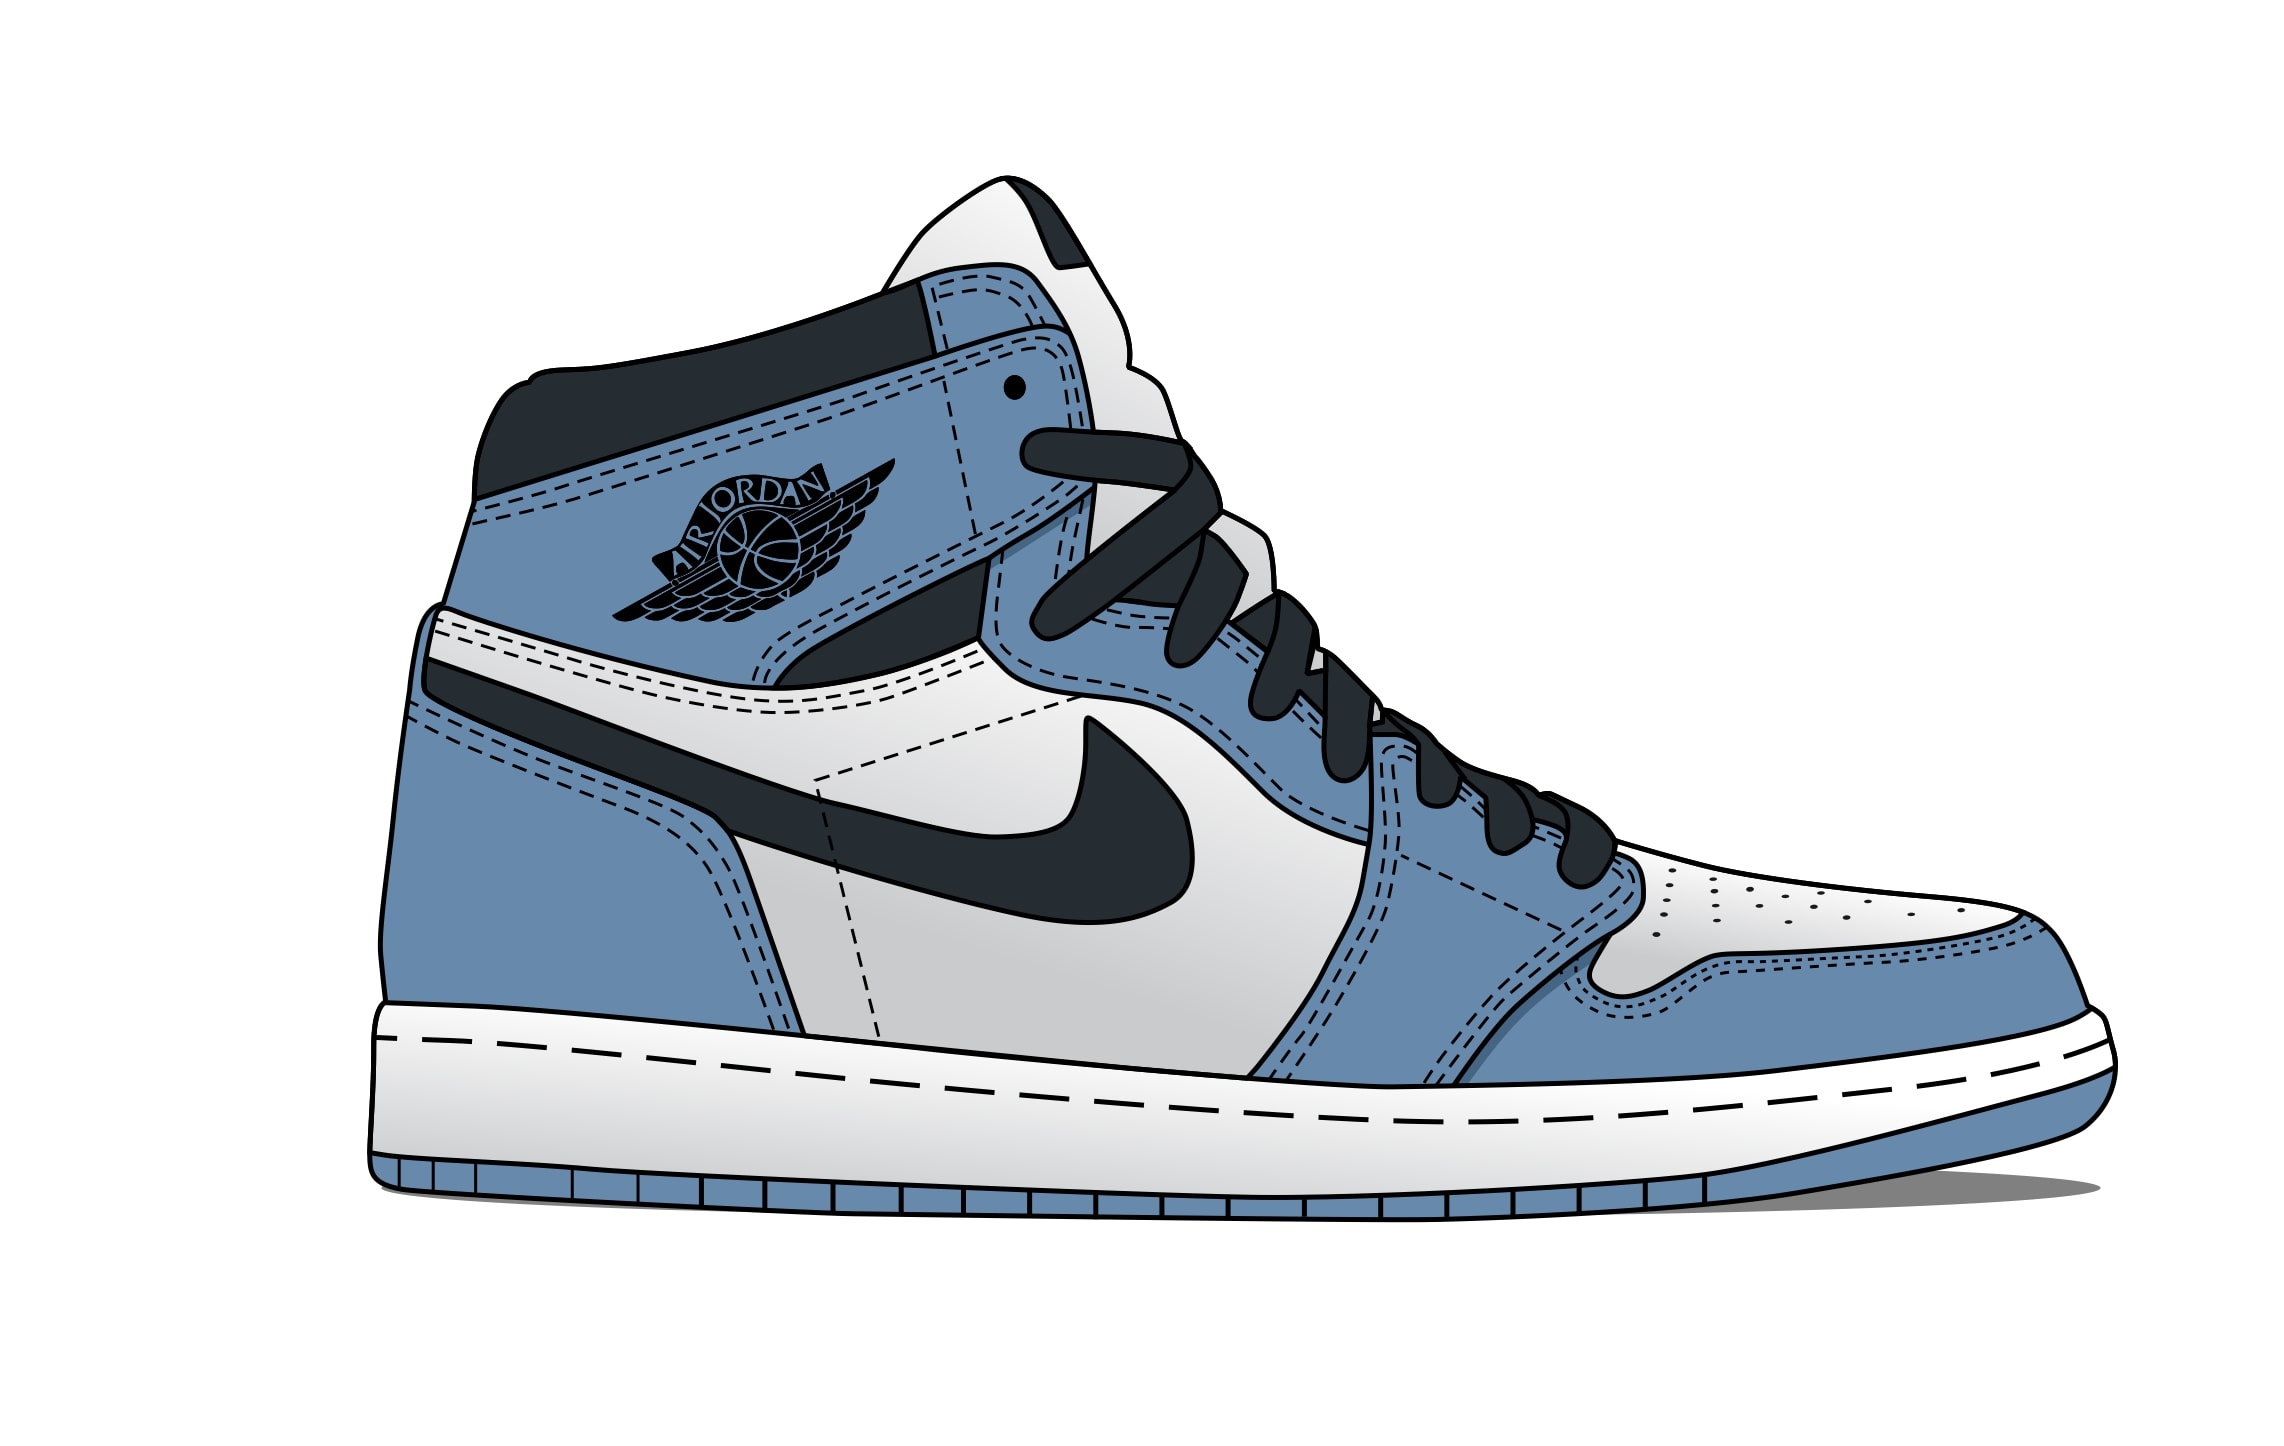 Draw your shoes into vector art or cartoon by Anjarghee | Fiverr